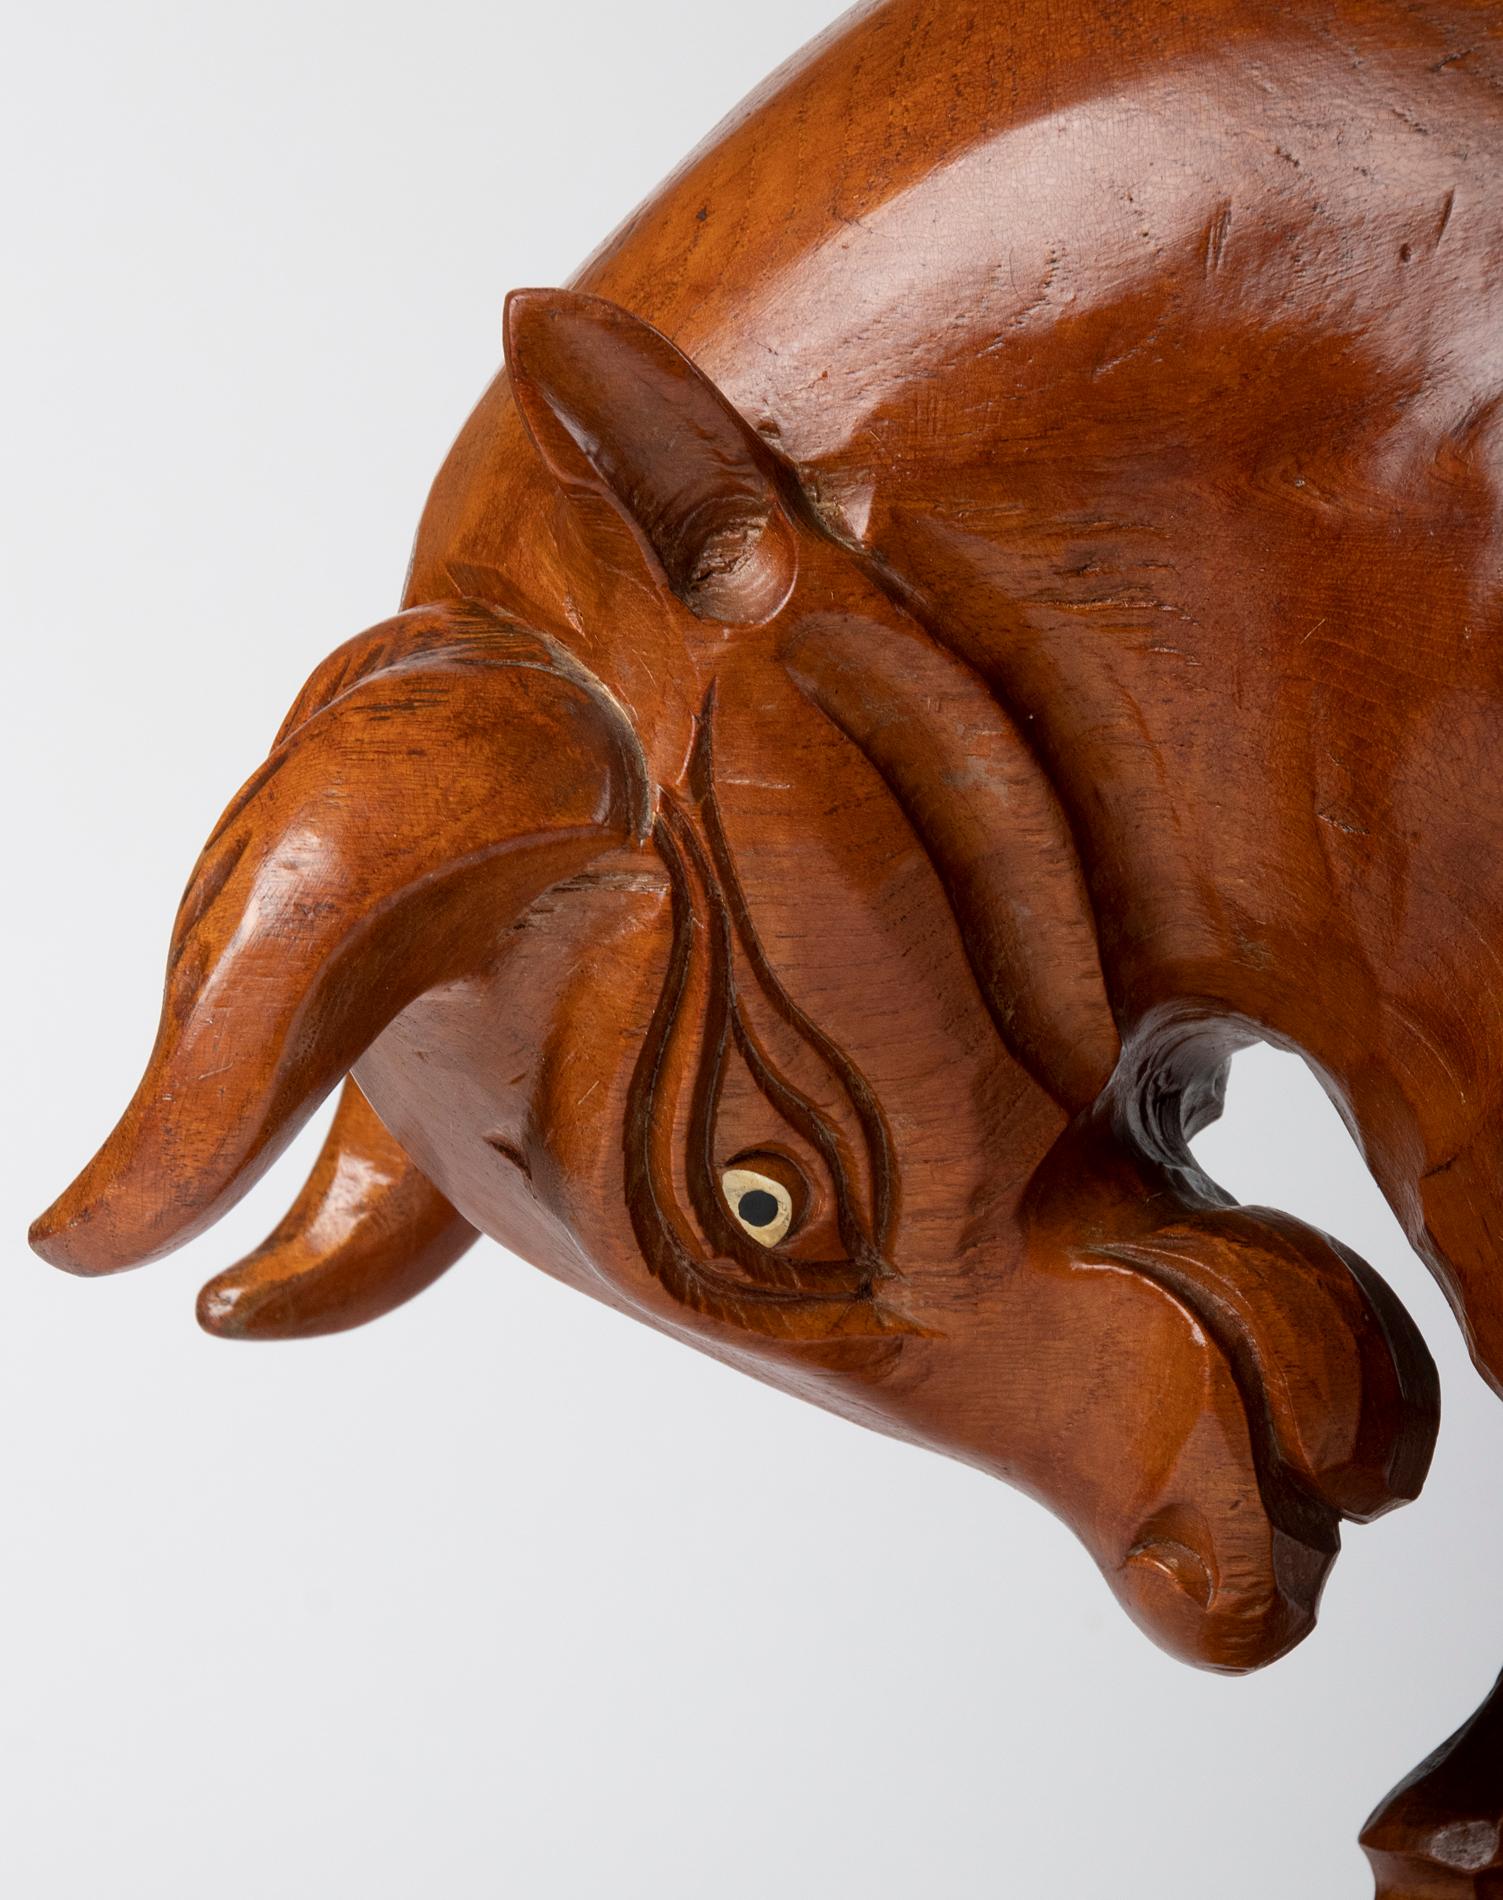 Hand-Carved Mid 20th Century Spanish Modern Wooden Sculpture of a Bull For Sale